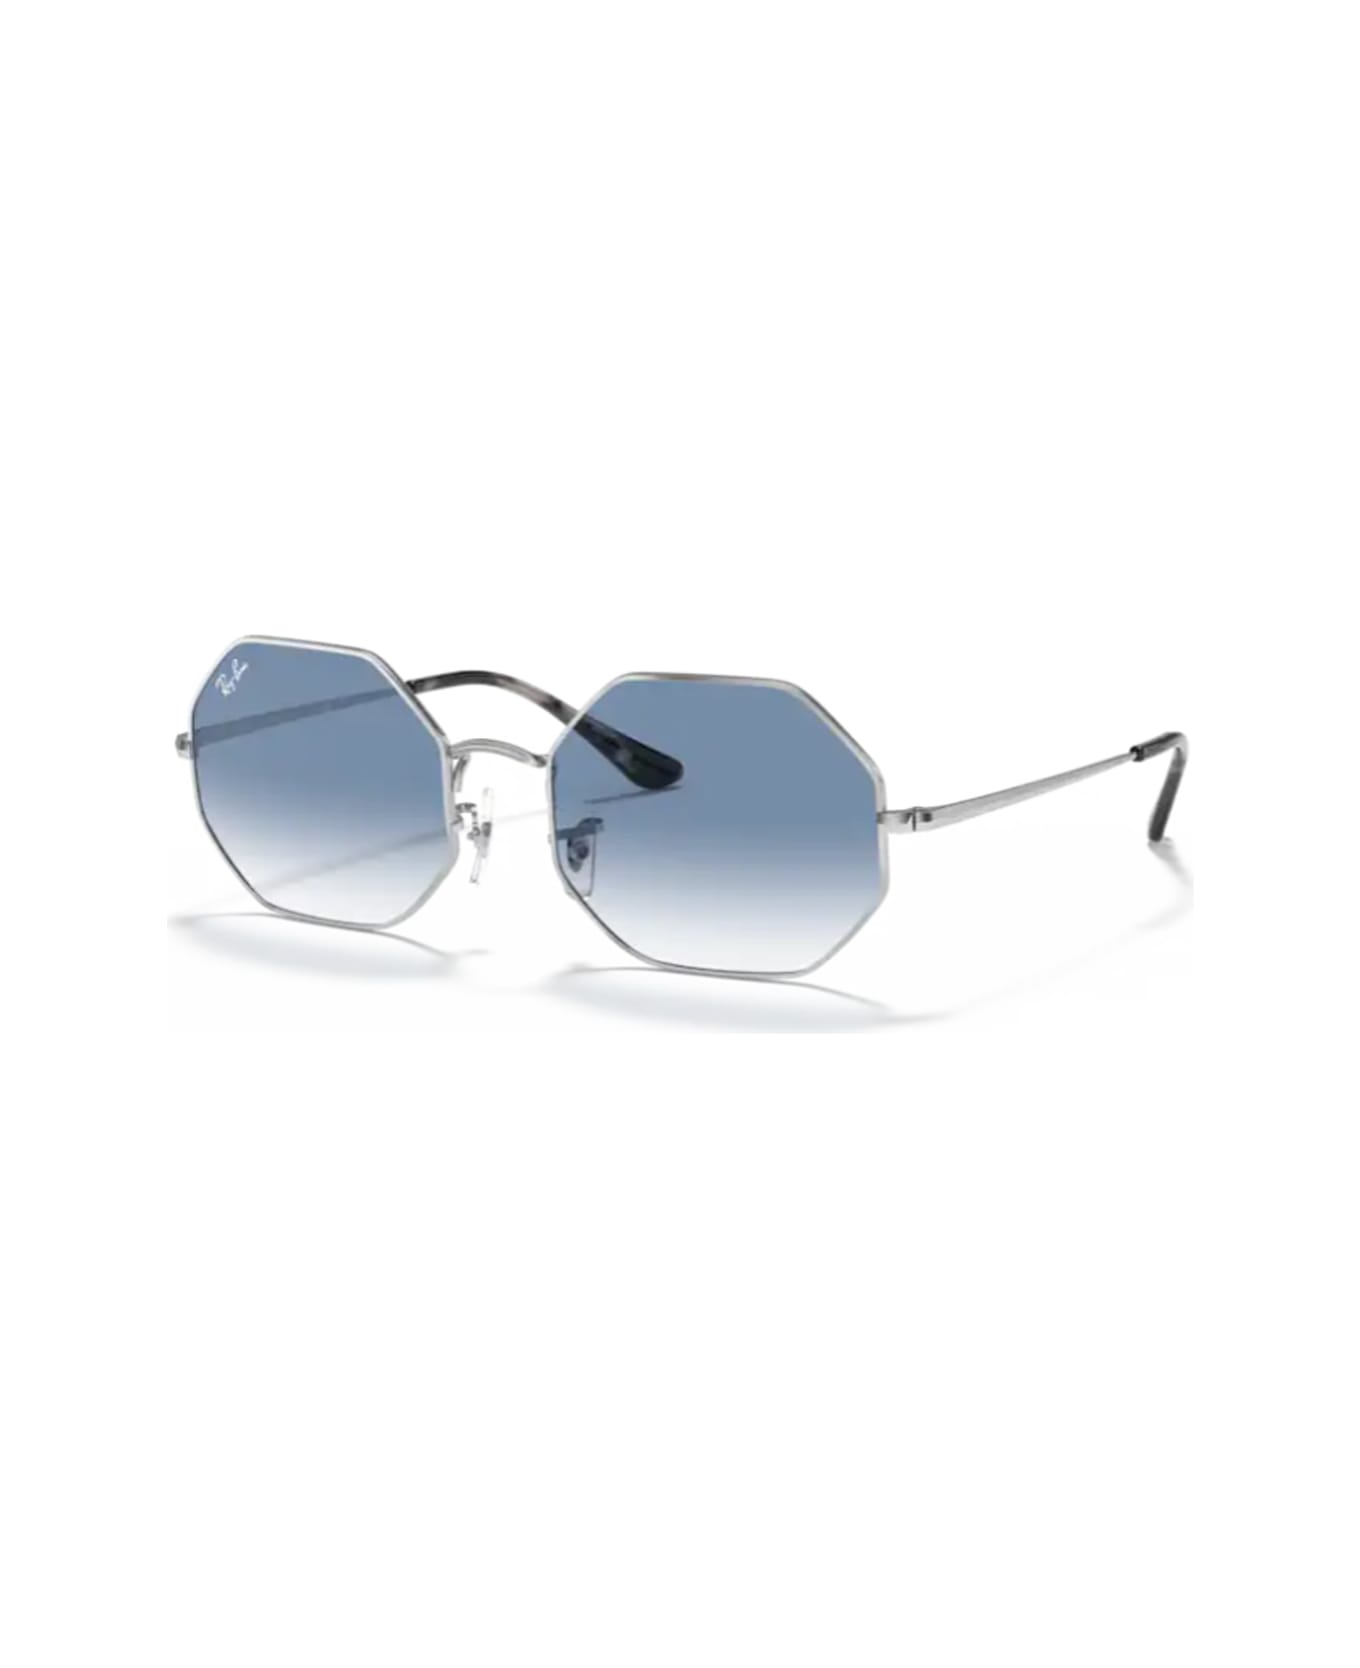 Ray-Ban Rb1972 Sunglasses - Argento